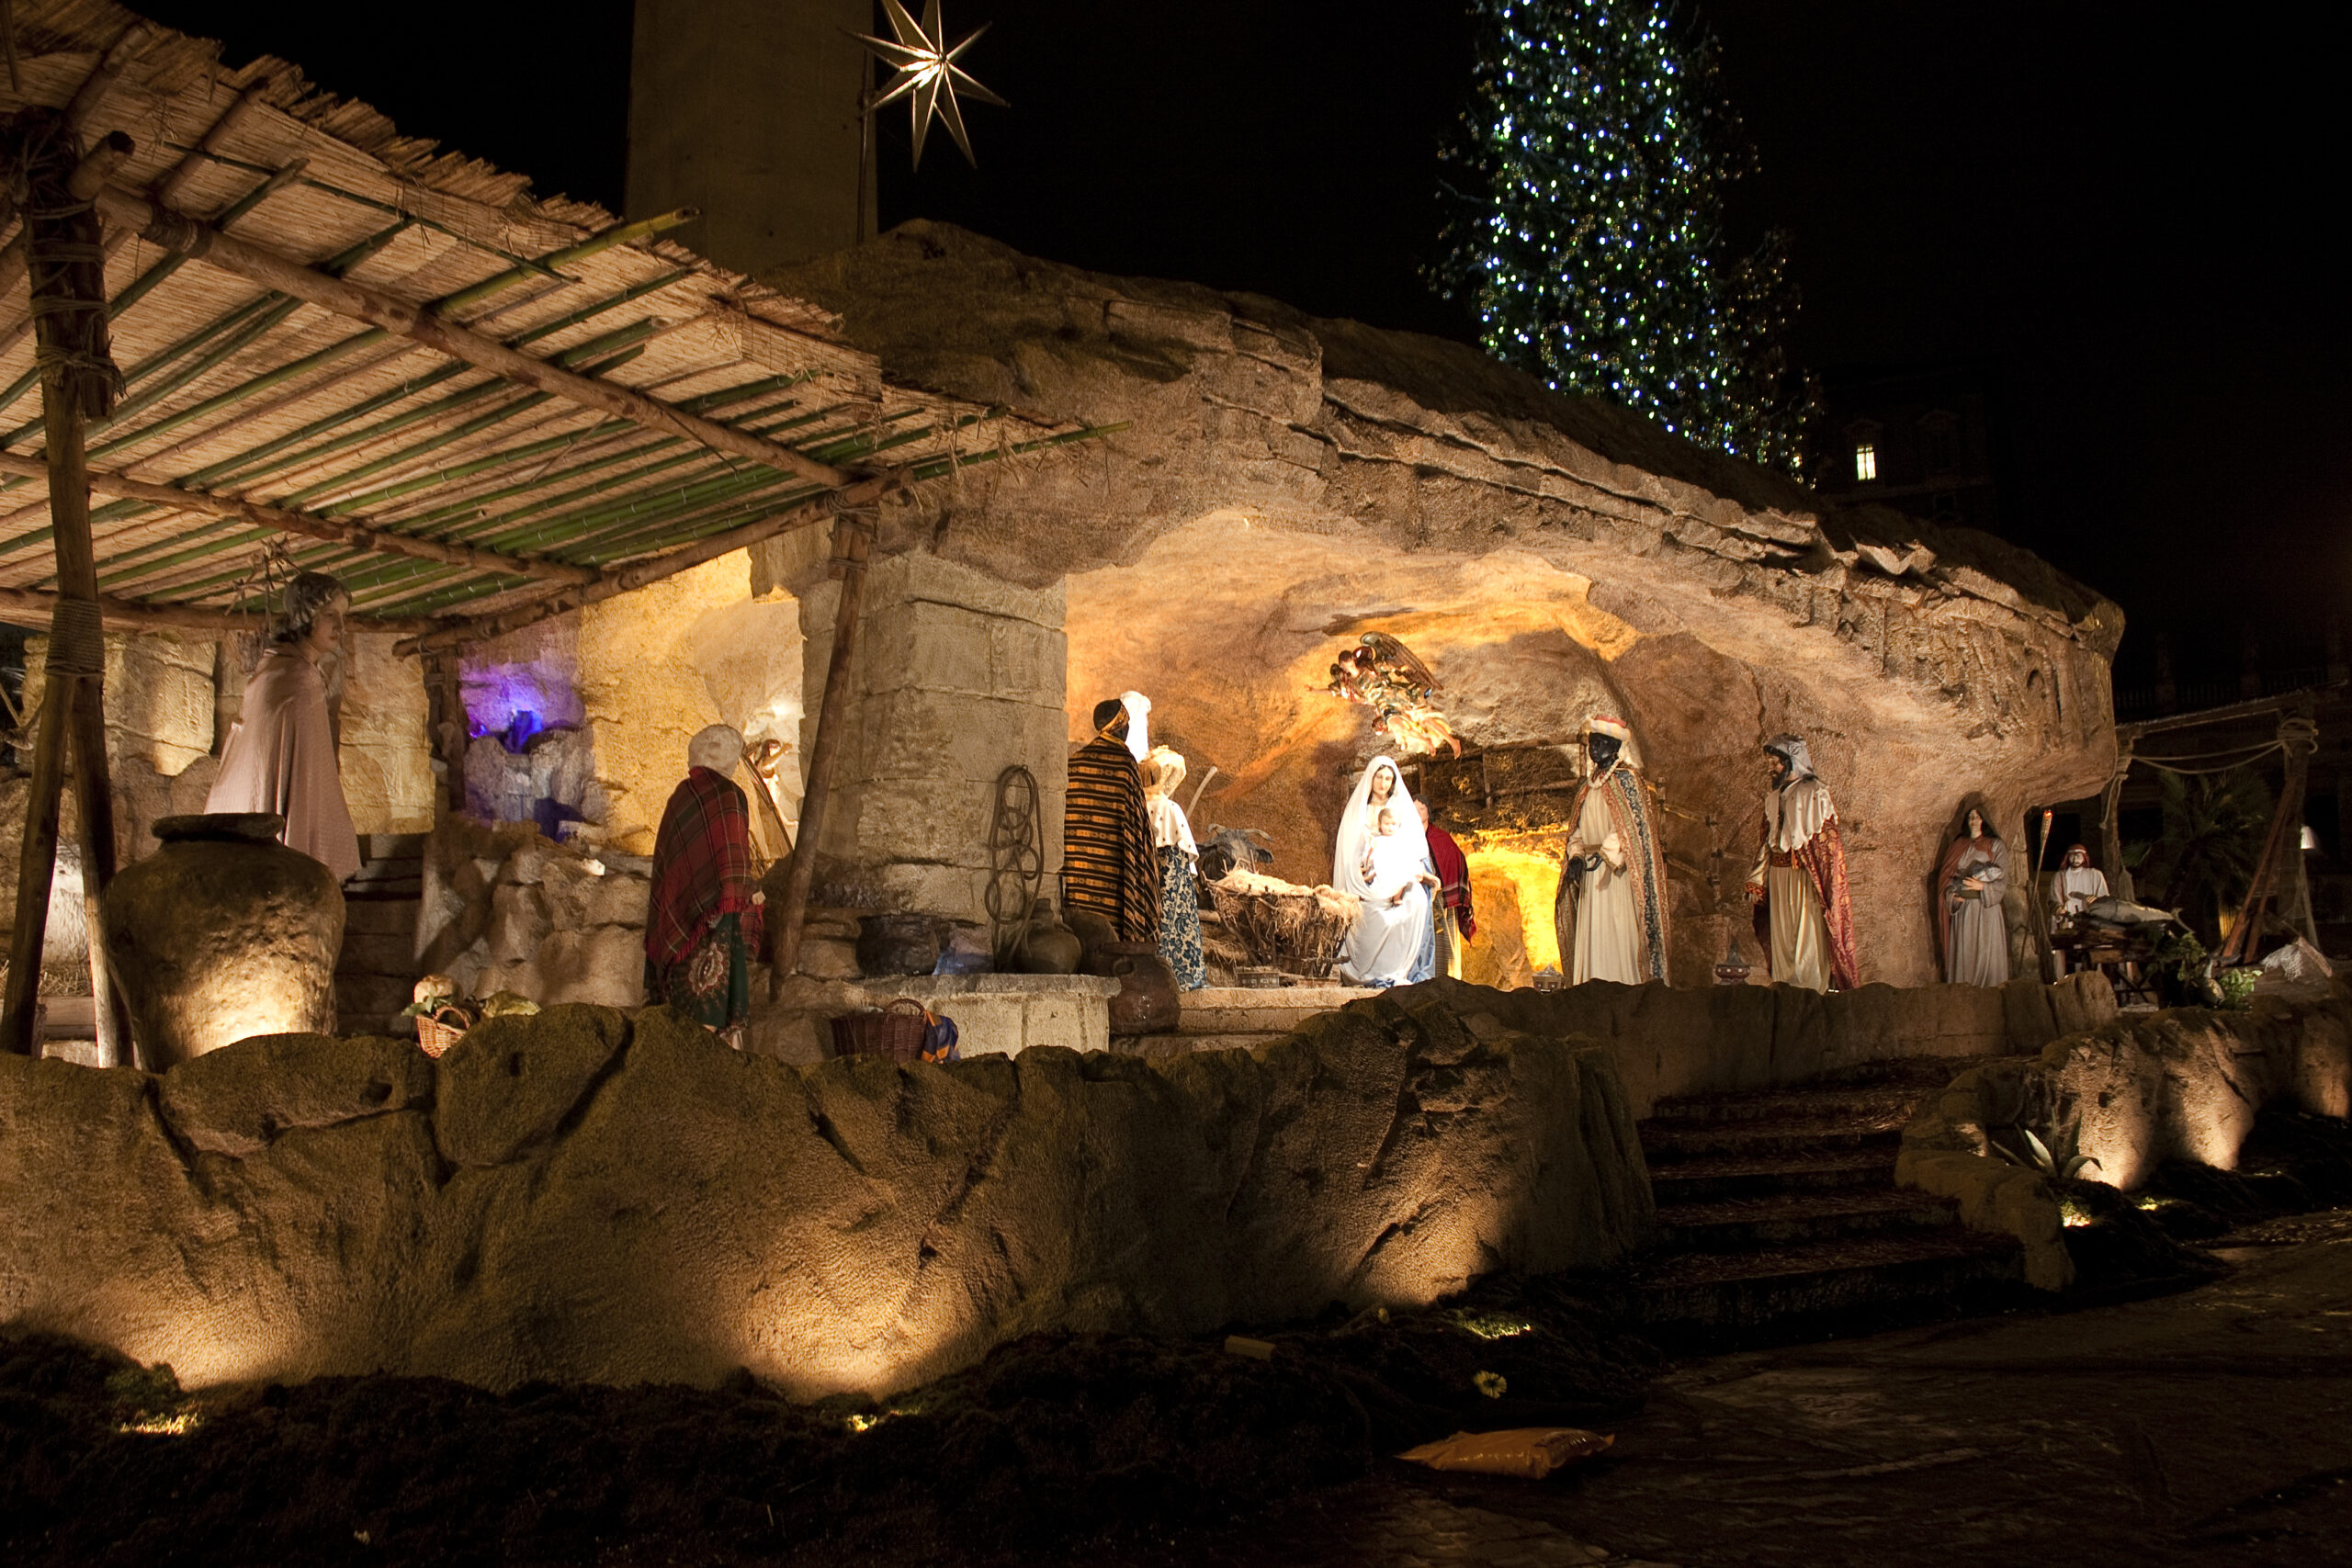 <h1 class="tribe-events-single-event-title">Grinnell Friends Church Live Nativity</h1>